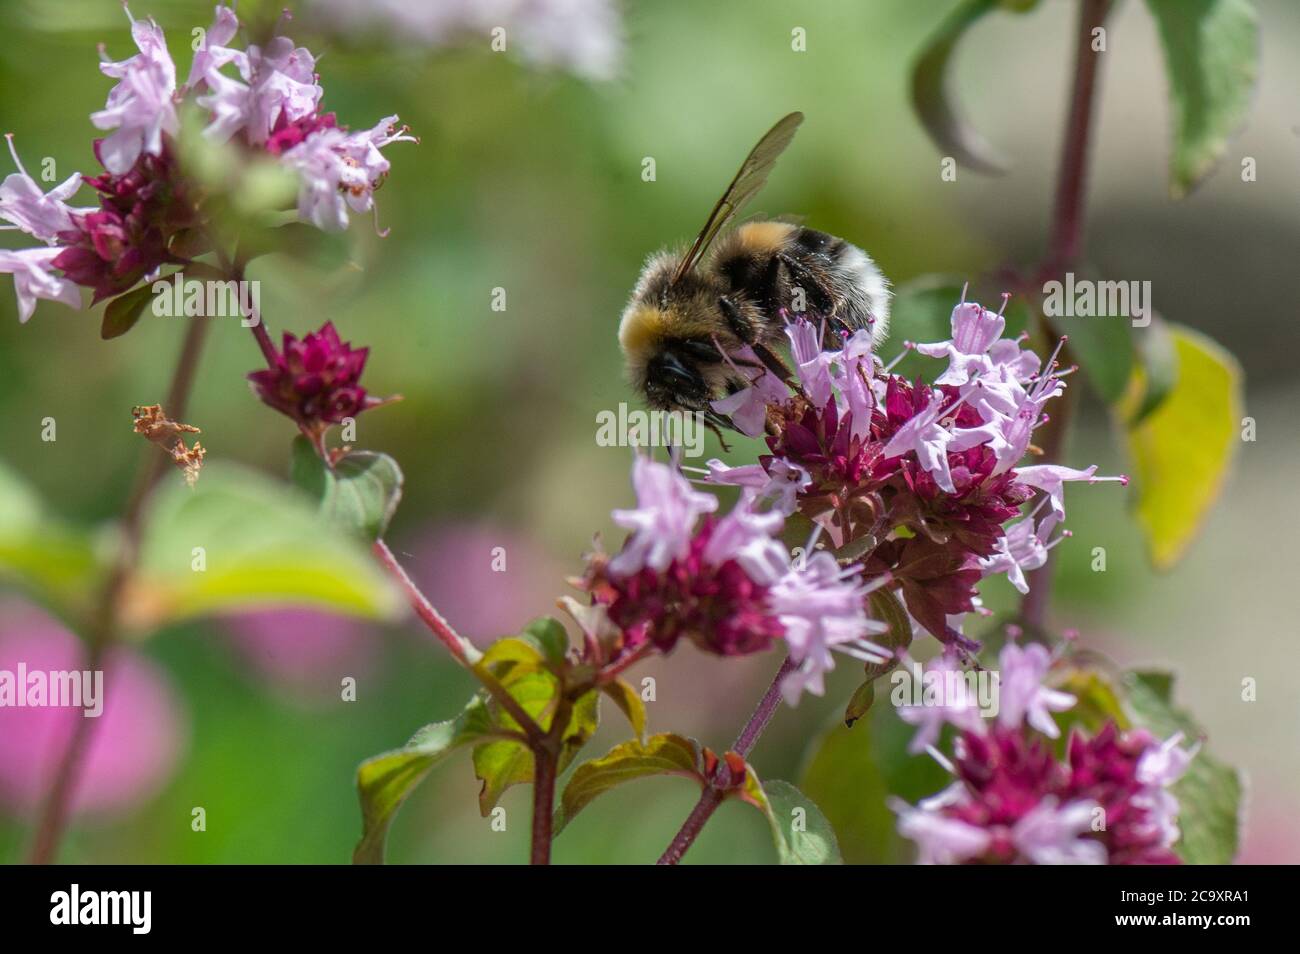 Bumblebee sur asclepias Blossom, Hambourg, Allemagne Banque D'Images